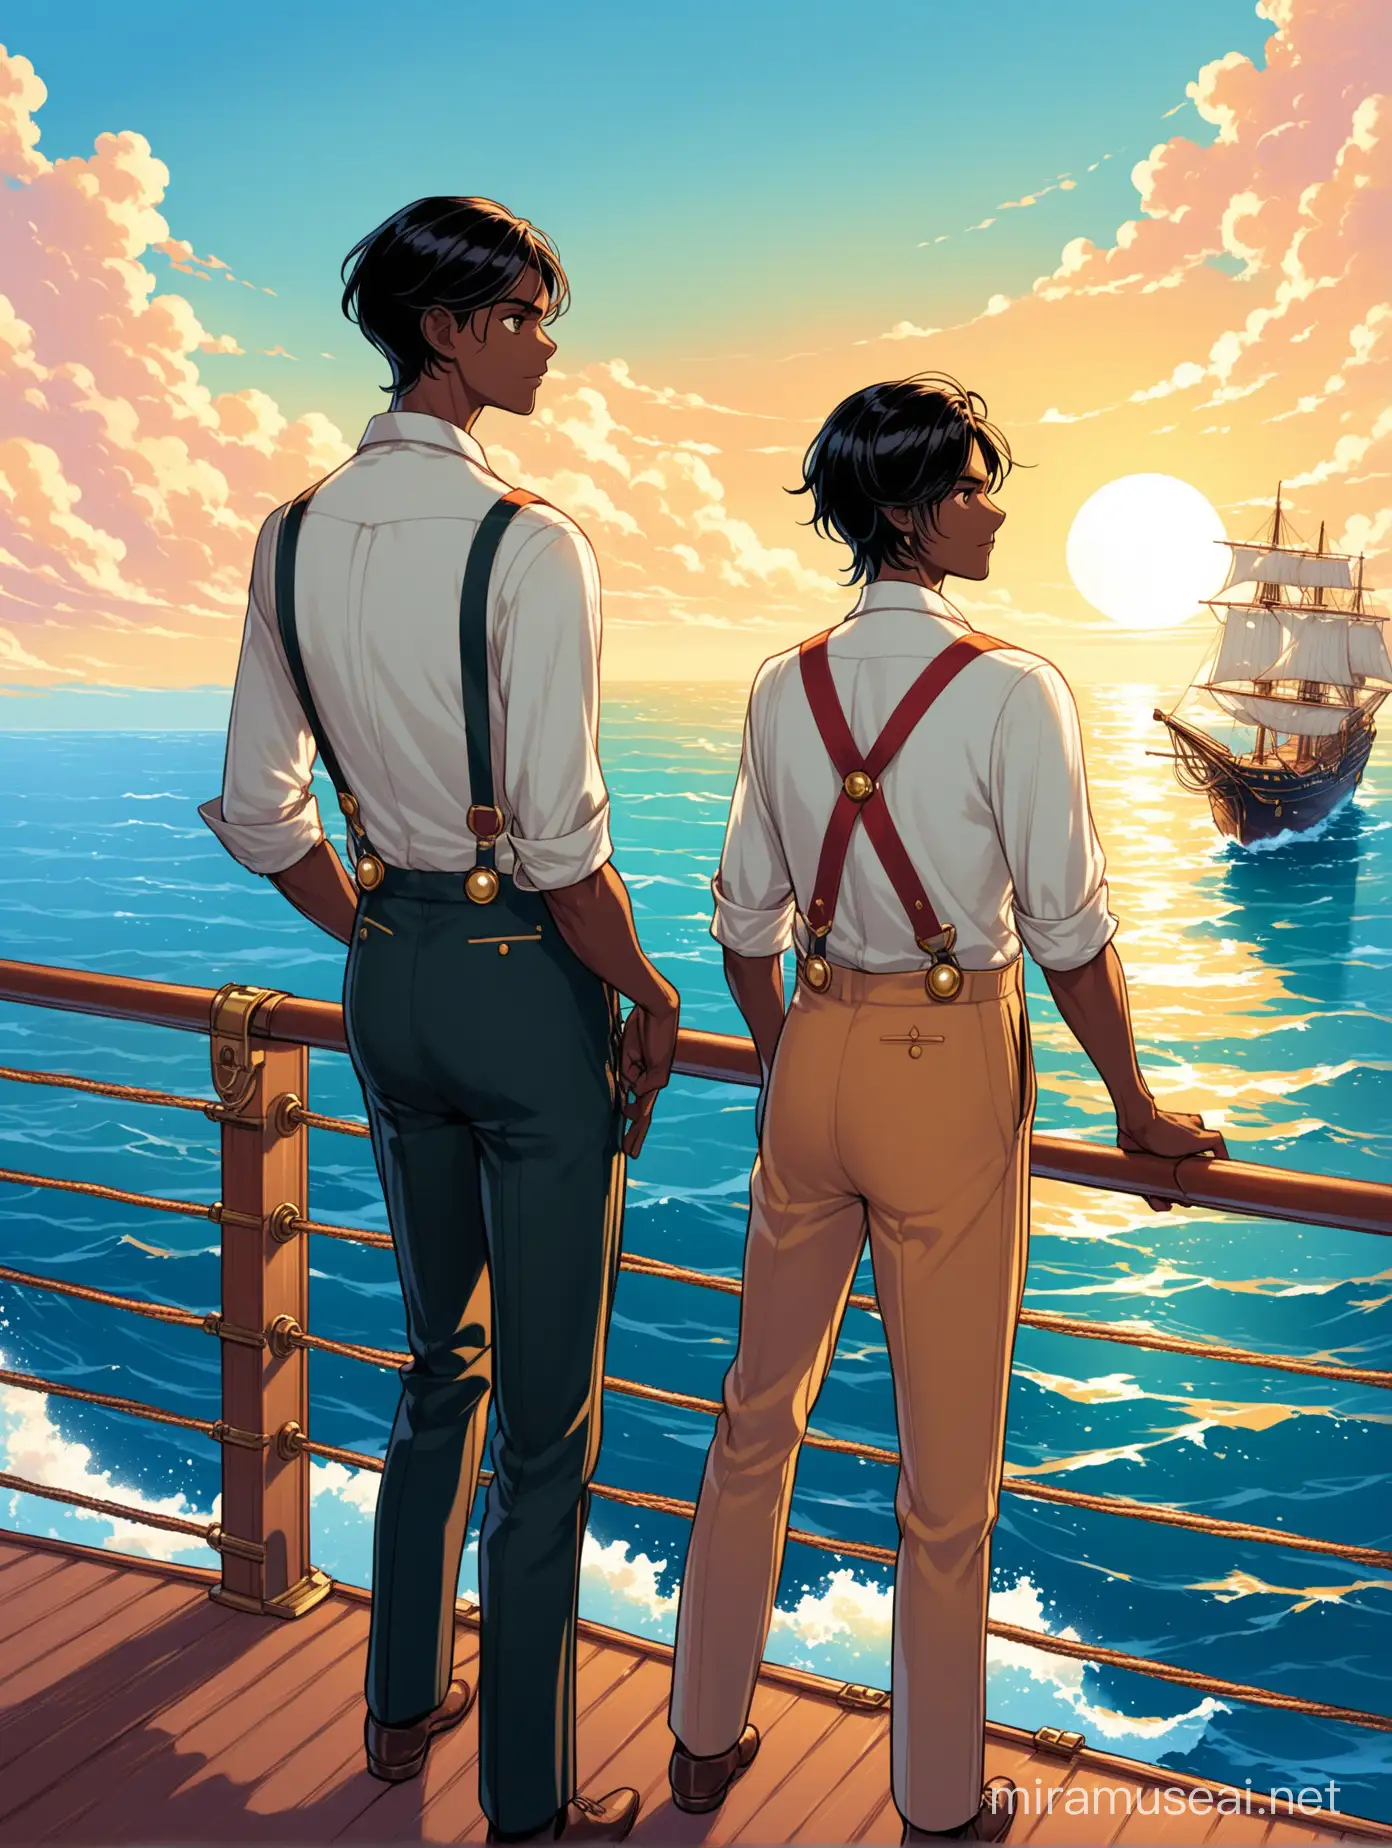 Jesper has light-dark skin and short dark hair. He is thin, lanky and very tall. He has pearl-handled revolvers. He is dressed in a bright outfit: shirt, trousers with suspenders. He stands with his back to us, holding the rail of a ship sailing on the sea, and looks at another ship.